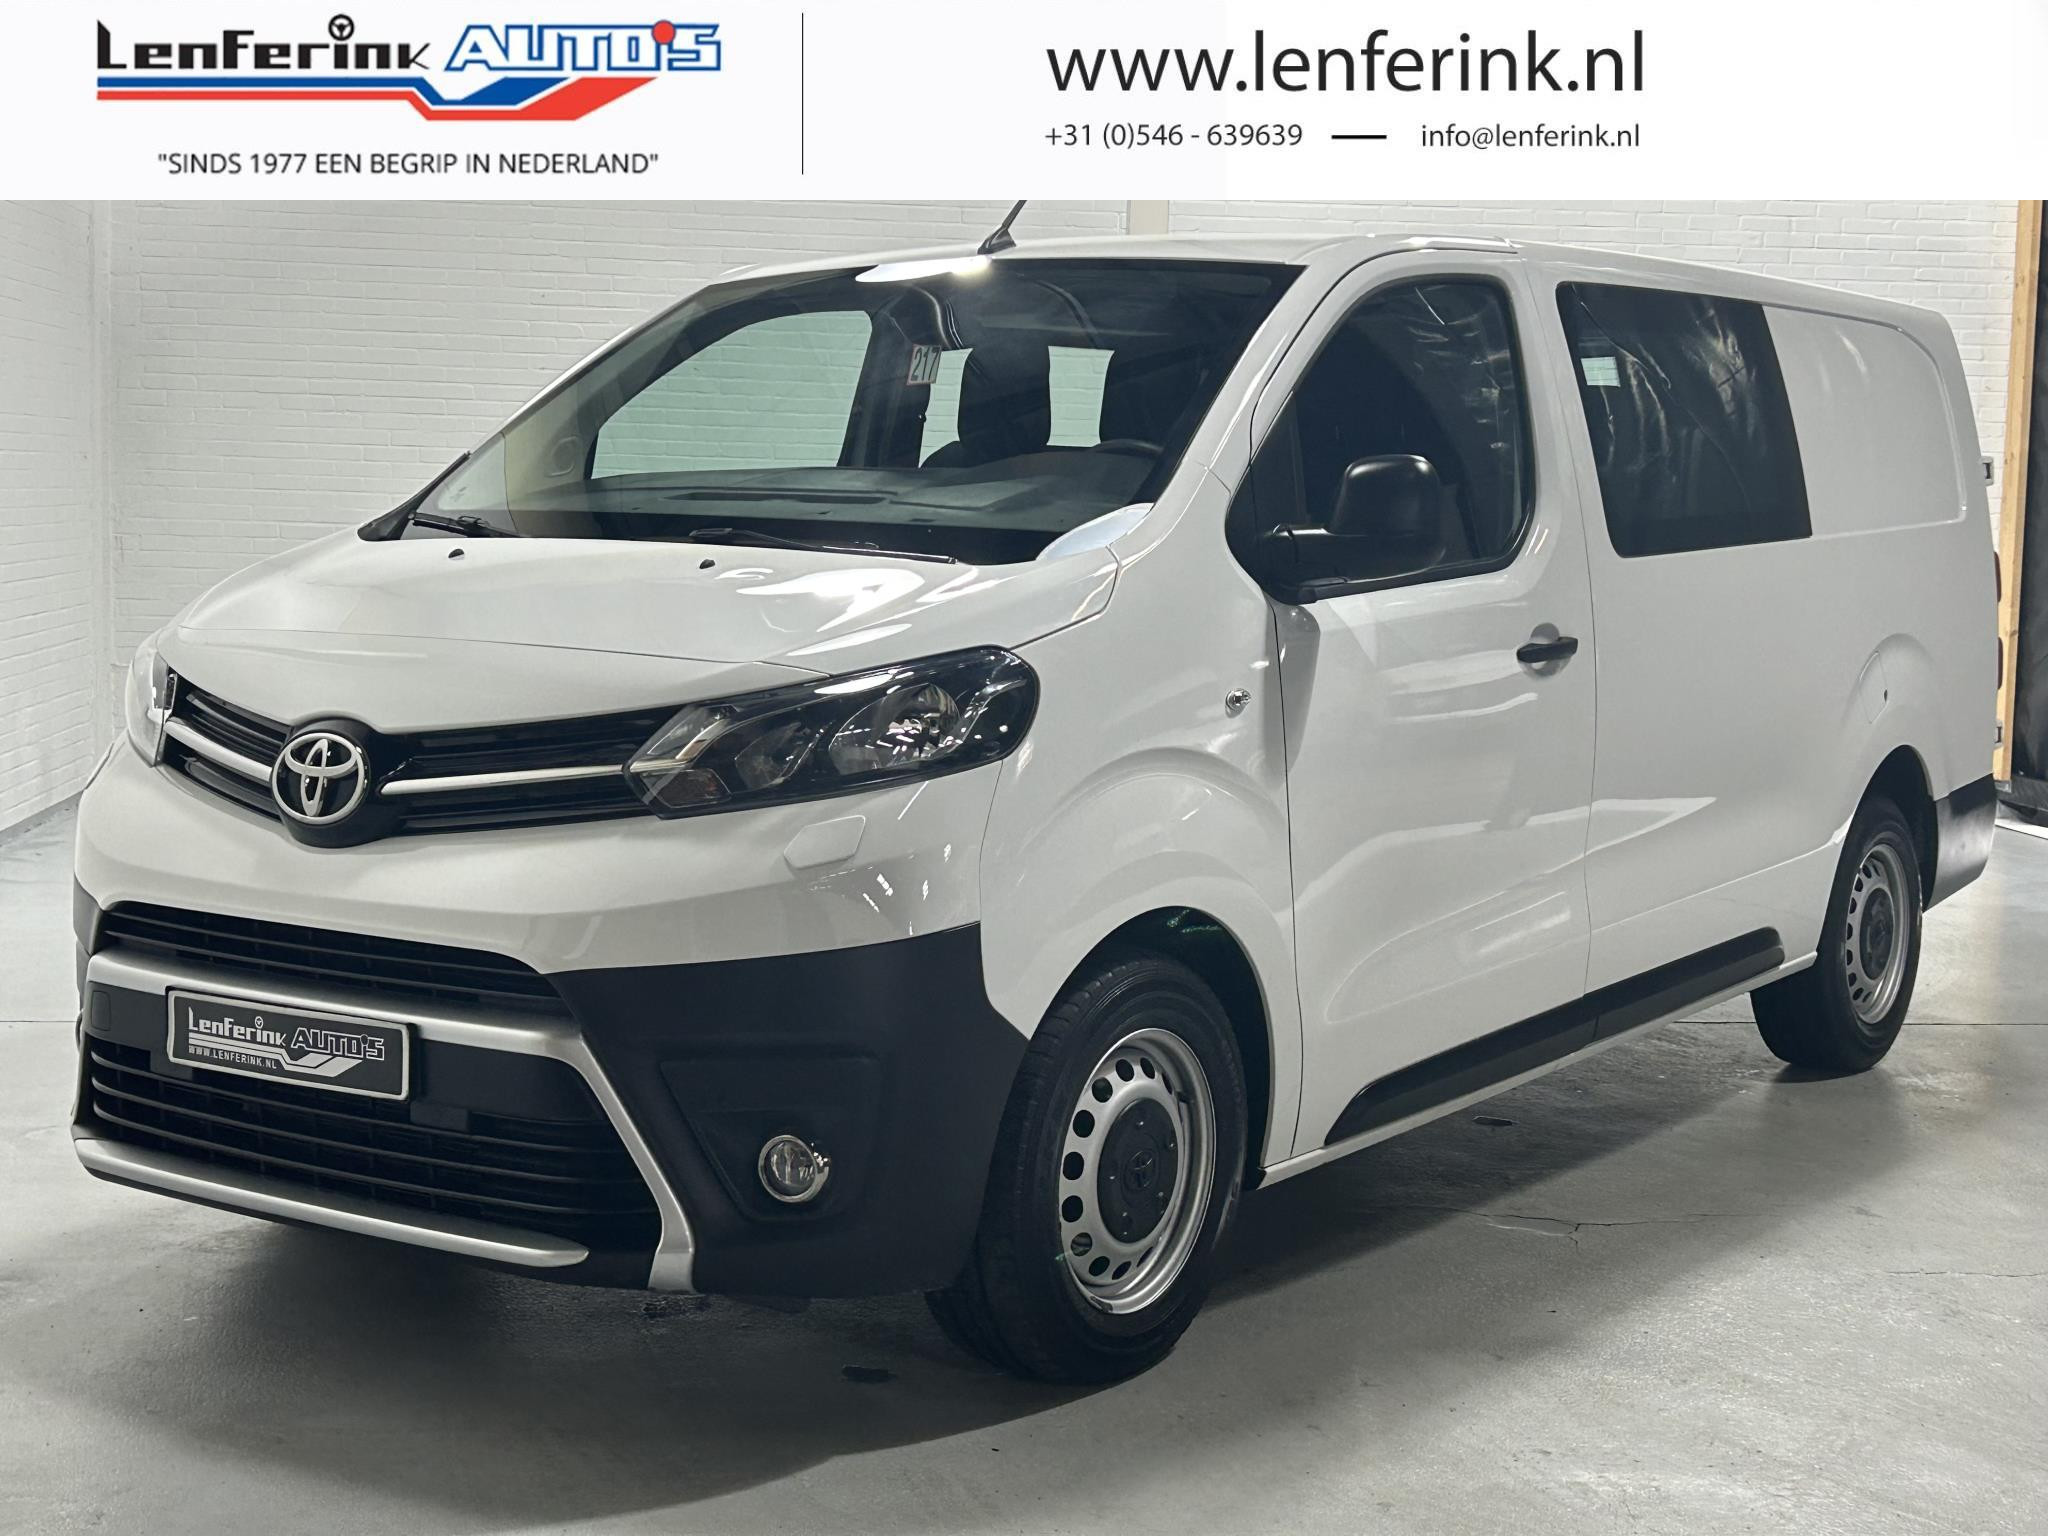 Toyota ProAce Worker 2.0 D-4D 145 pk Dubbel Cabine 6-Zits Airco Cruise Control, Dodehoek Assist, Apple Carplay, PDC achter